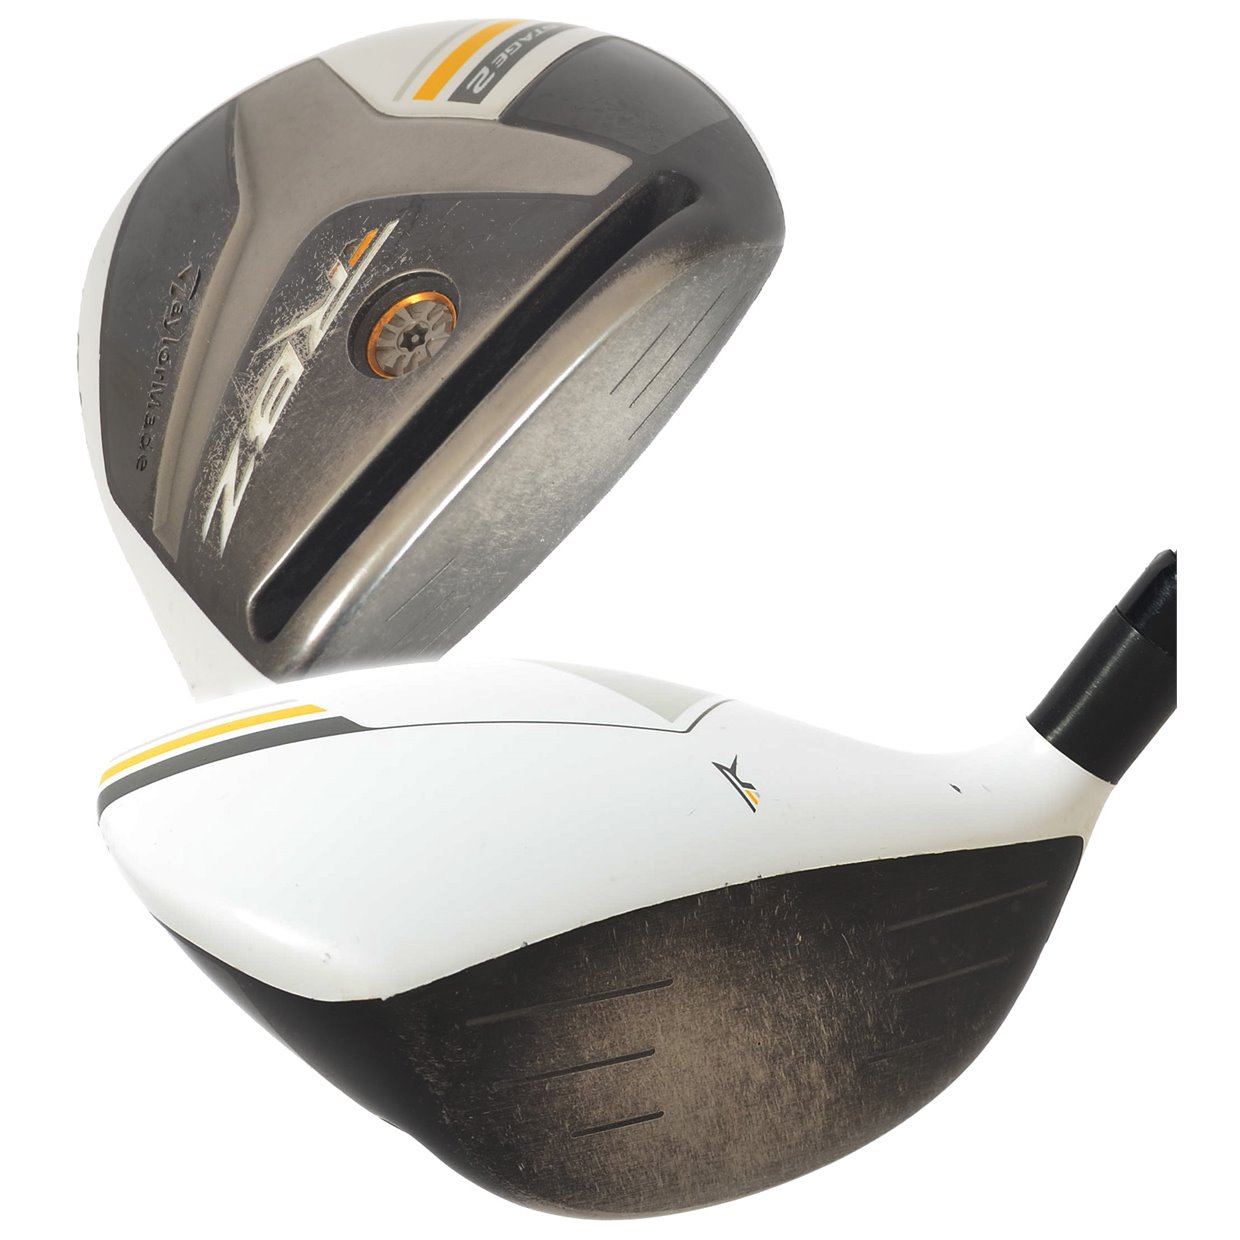 rbz stage 2 fairway wood review